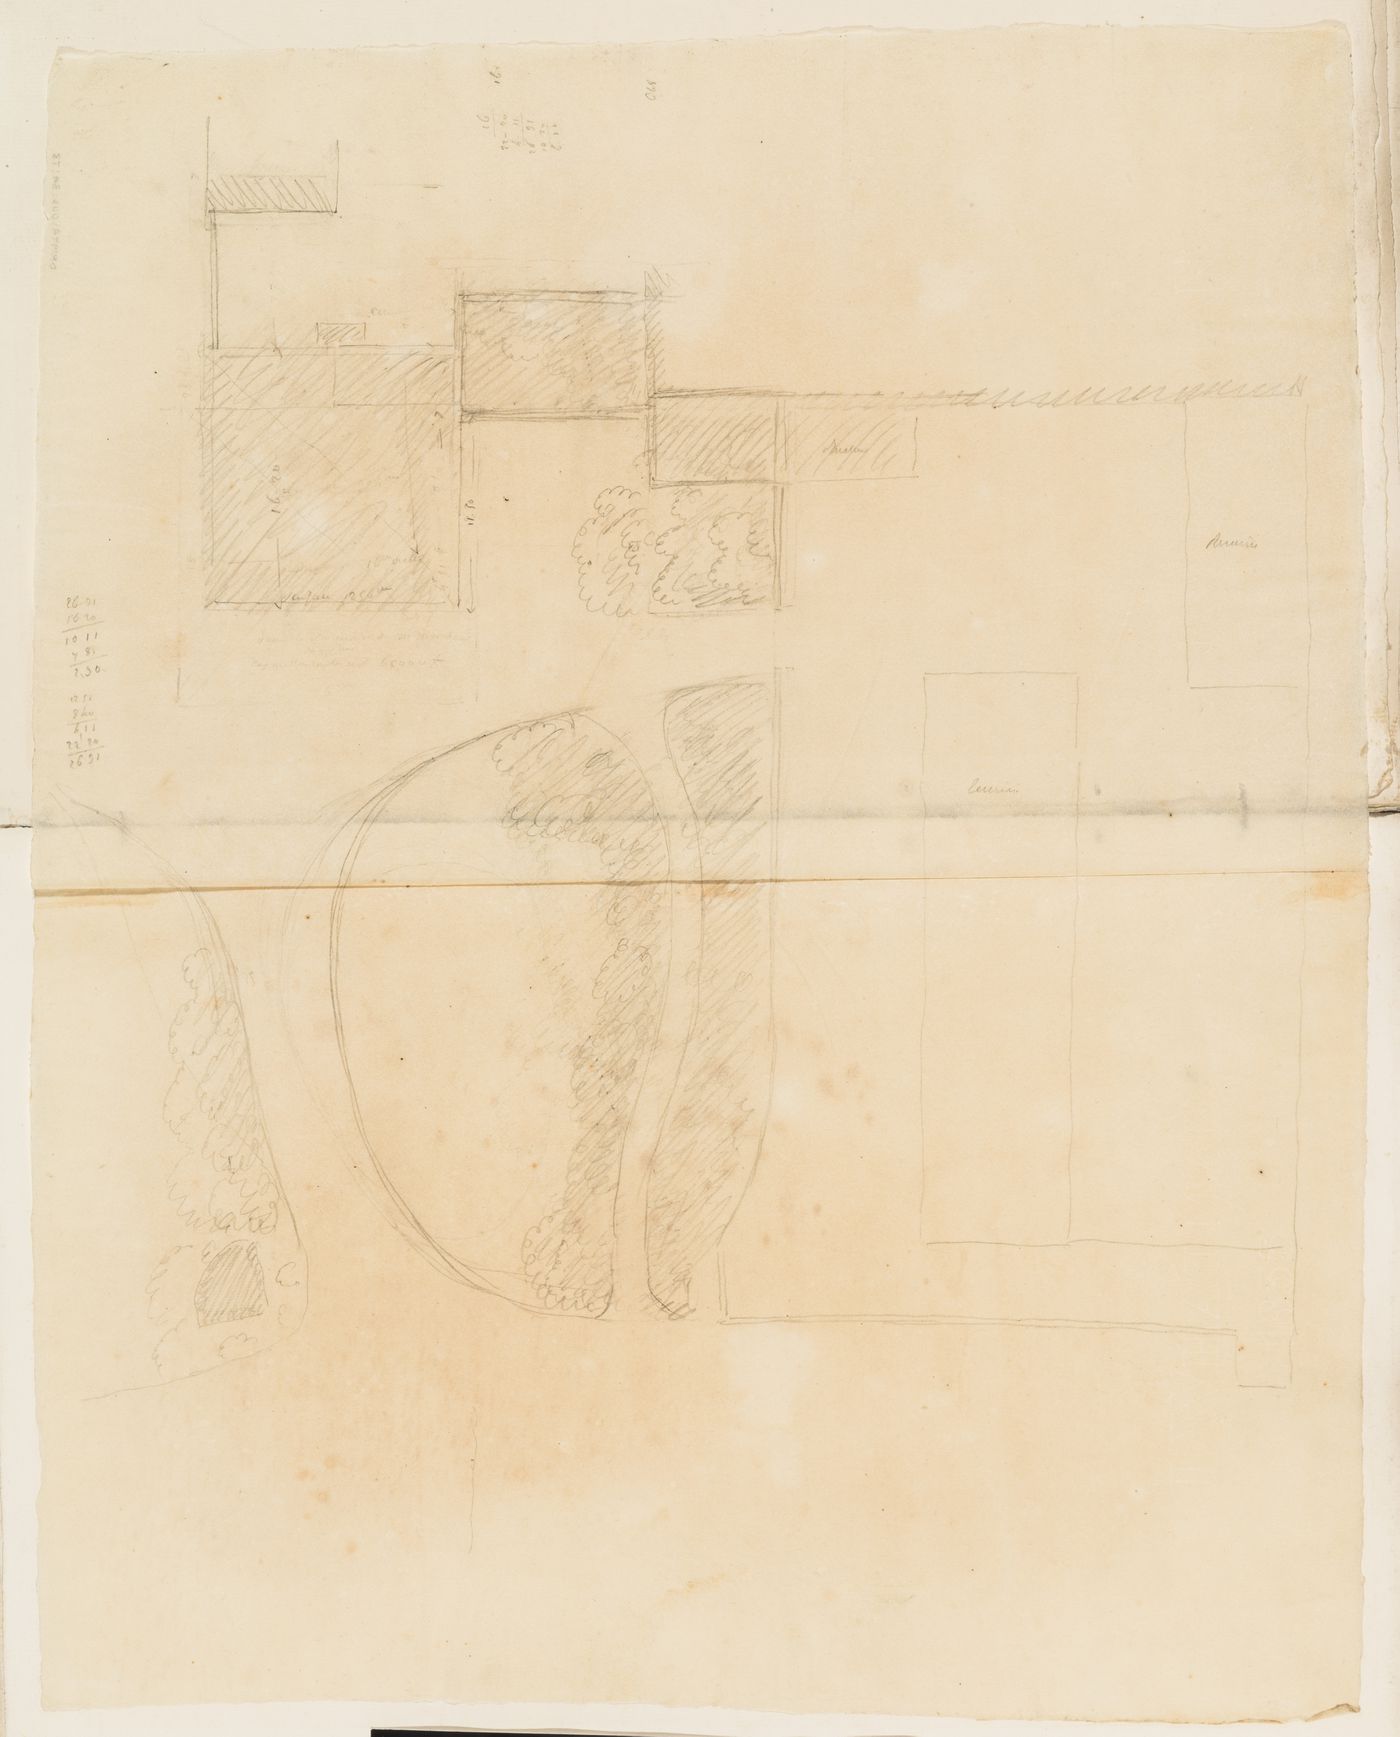 Project no. 10 for a country house for comte Treilhard: Site plan